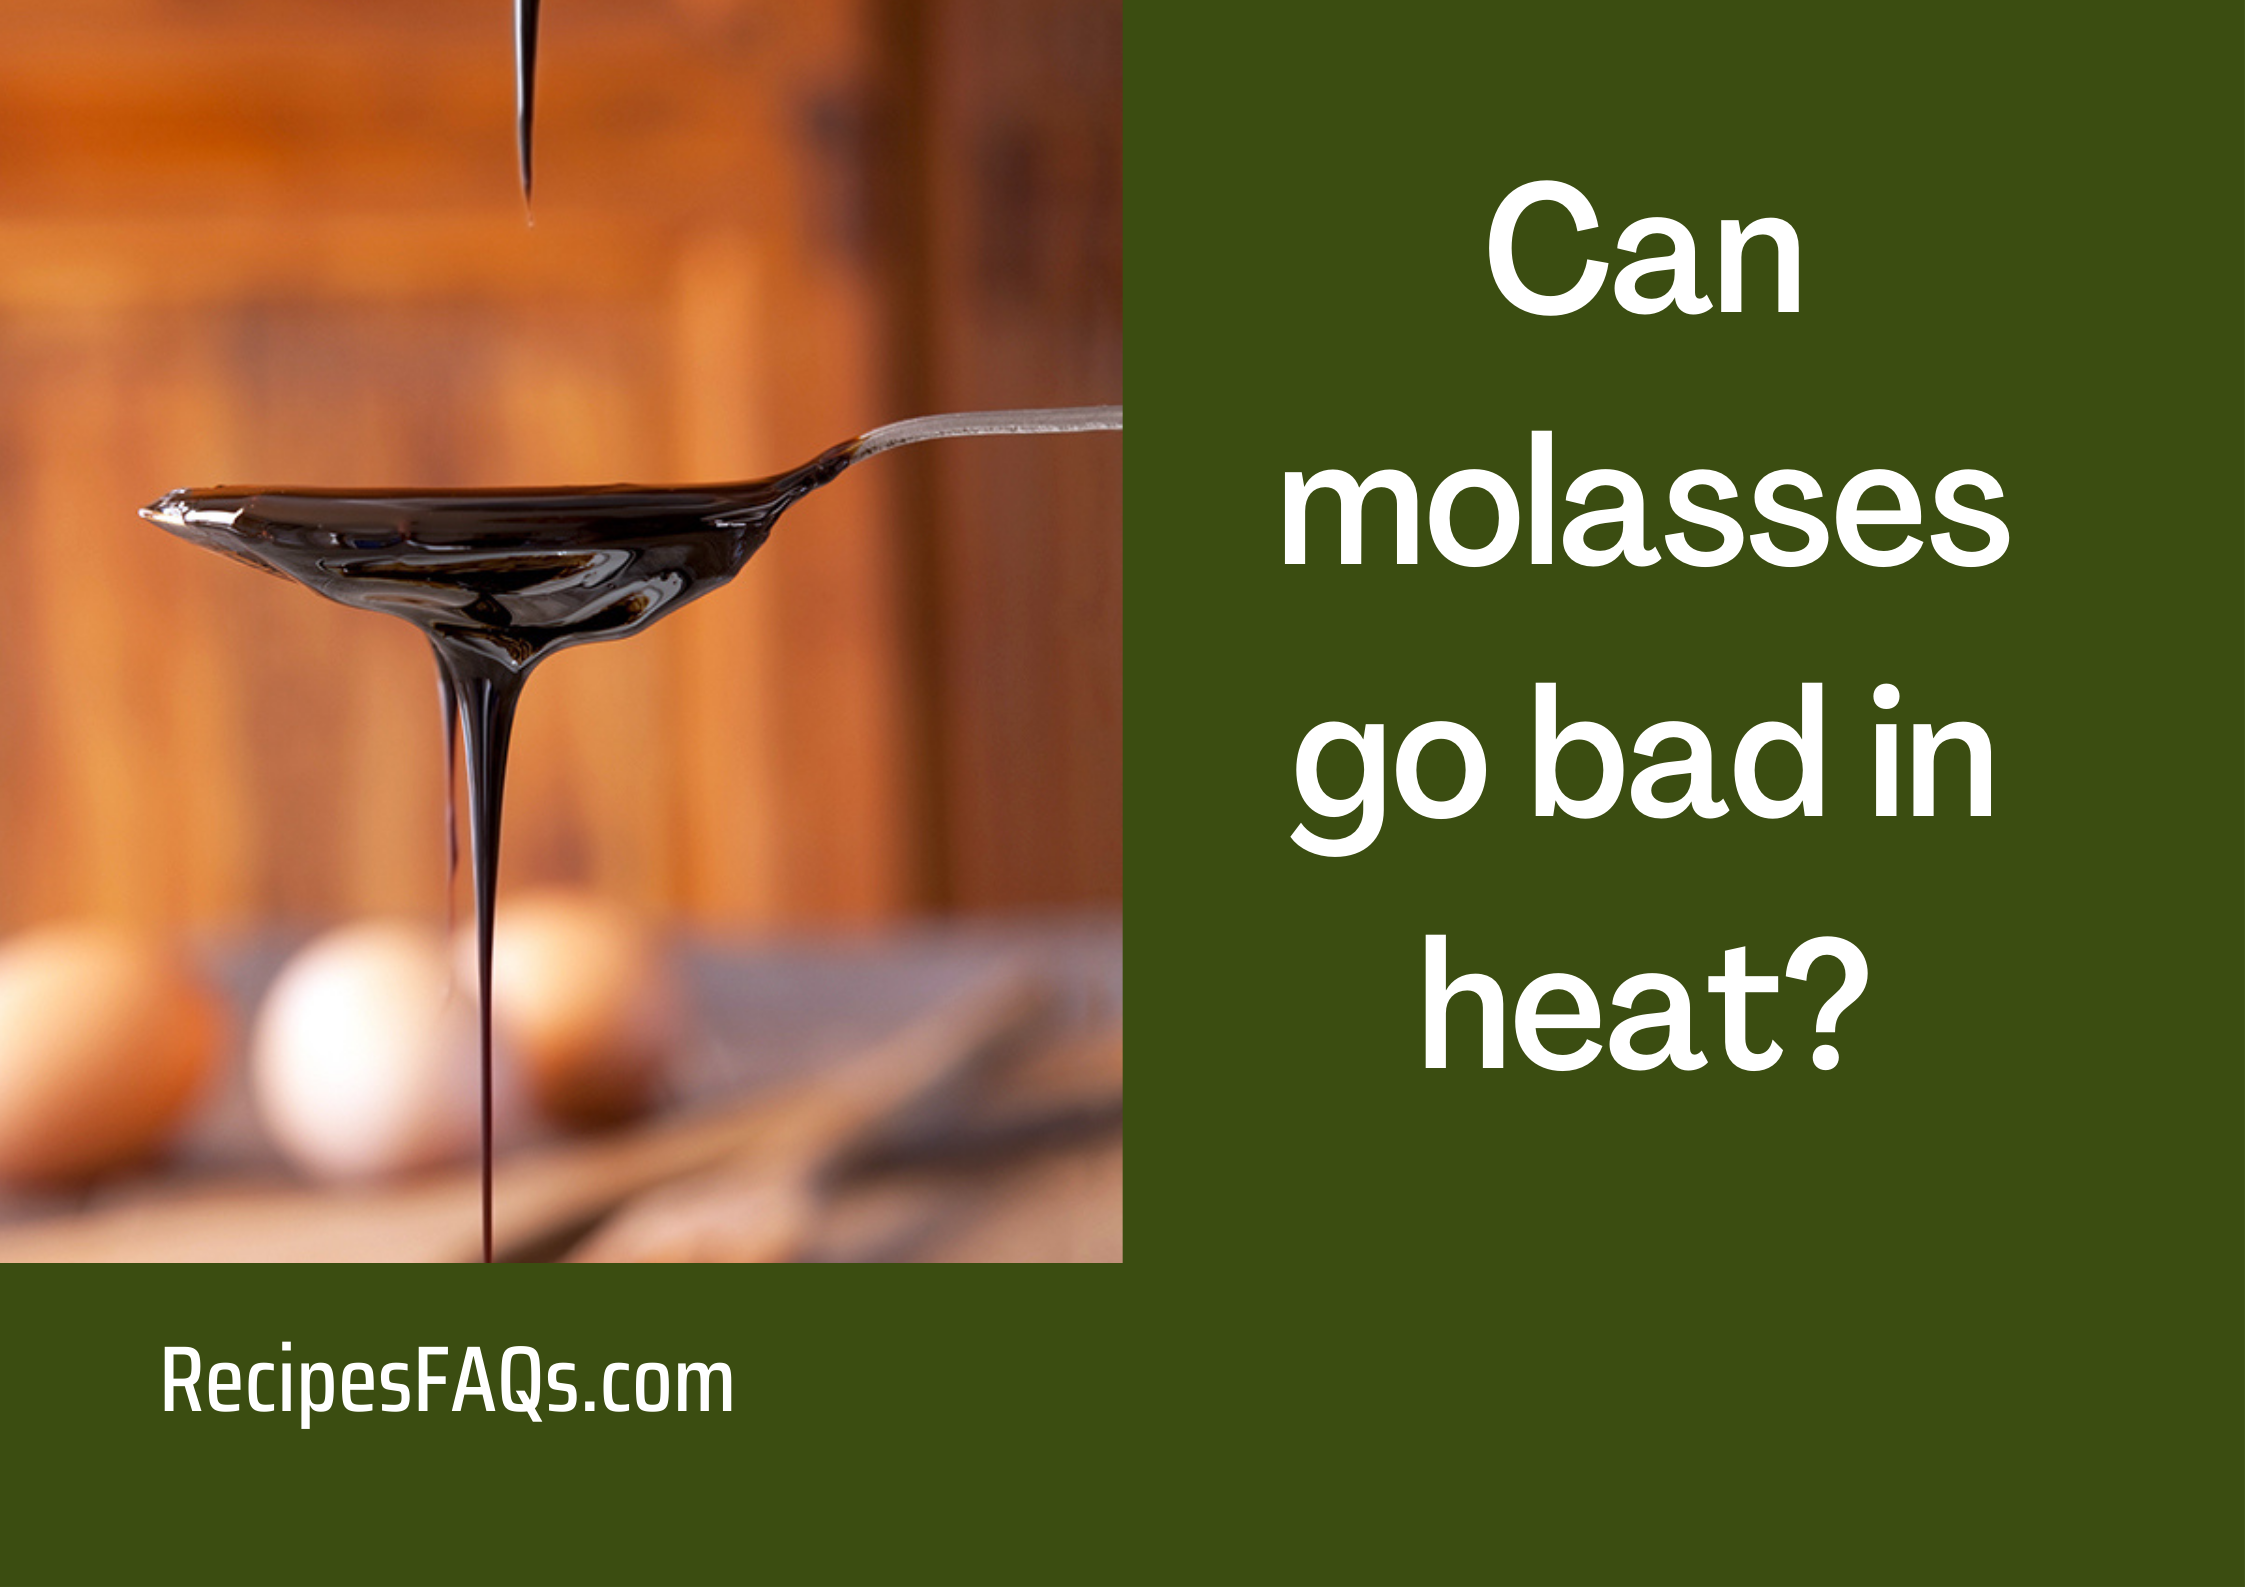 Can molasses go bad in heat